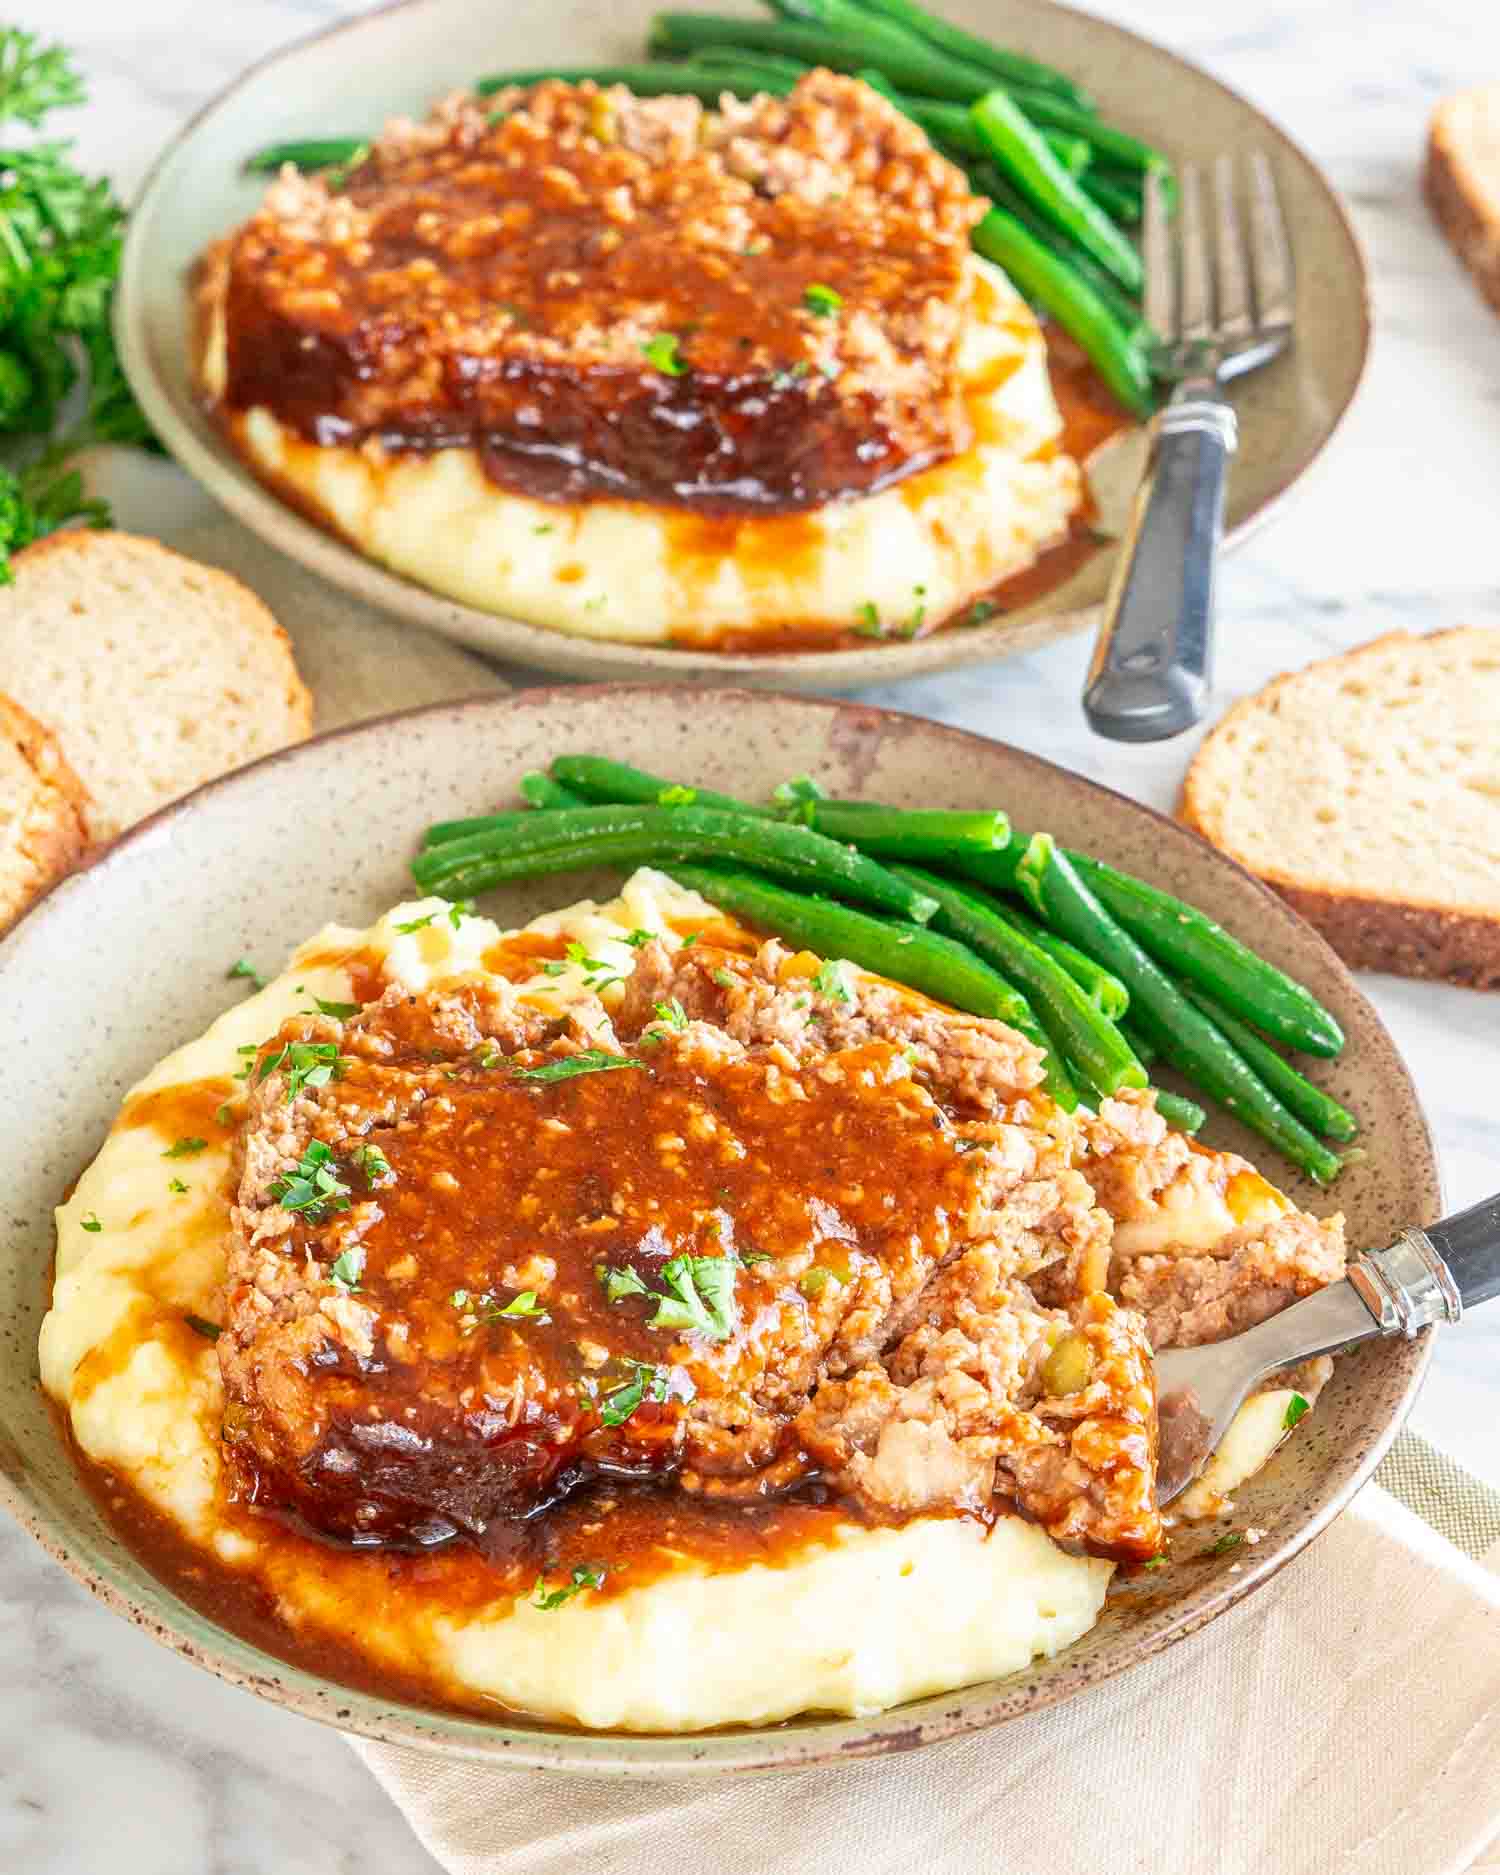 a slice of meatloaf on a bed of mashed potatoes along some green beans.